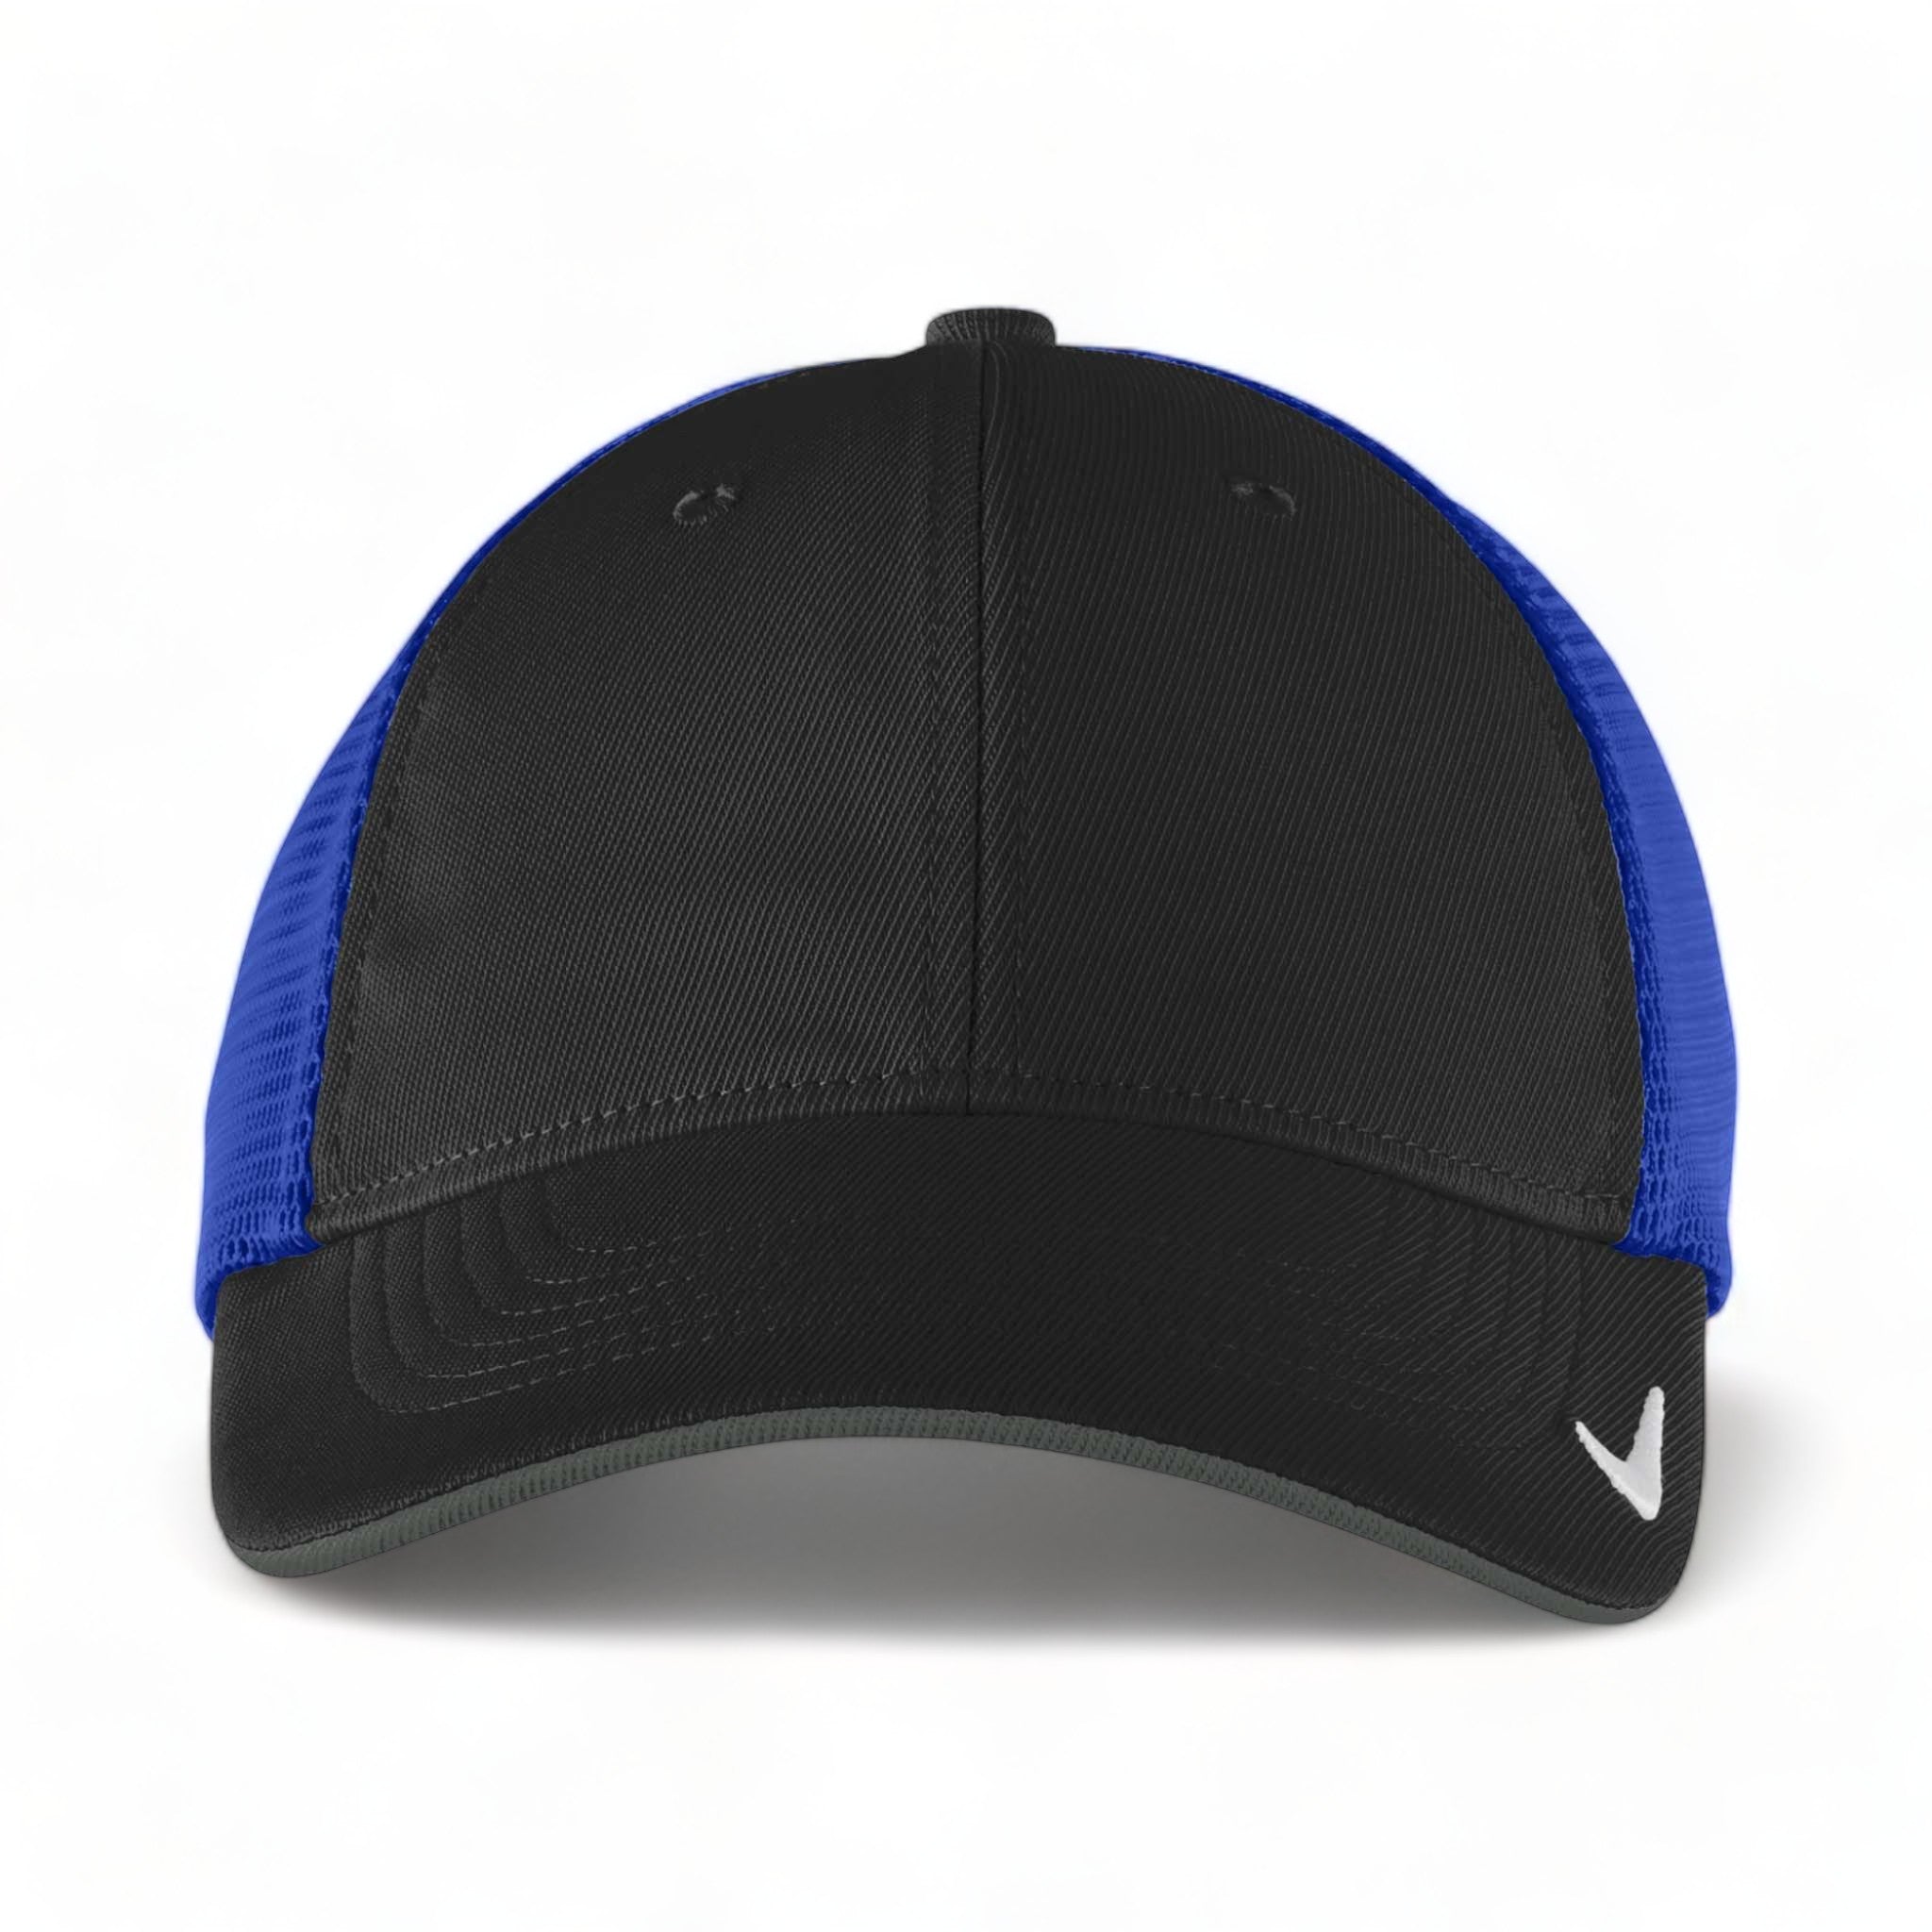 Front view of Nike NKFB6448 custom hat in black and game royal